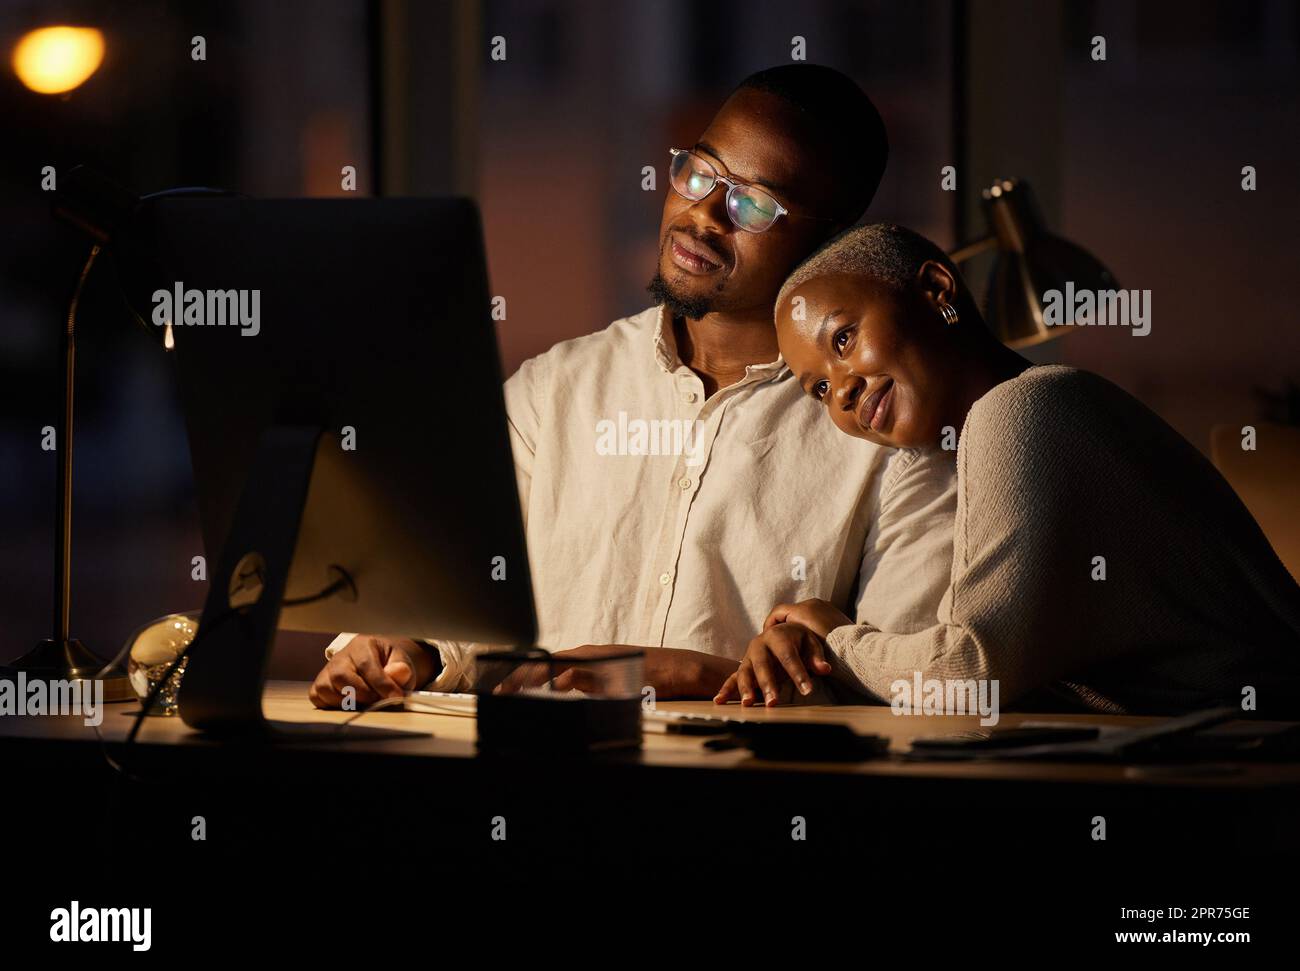 The romance is brewing between them. Shot of two affectionate businesspeople working together on a computer in an office at night. Stock Photo